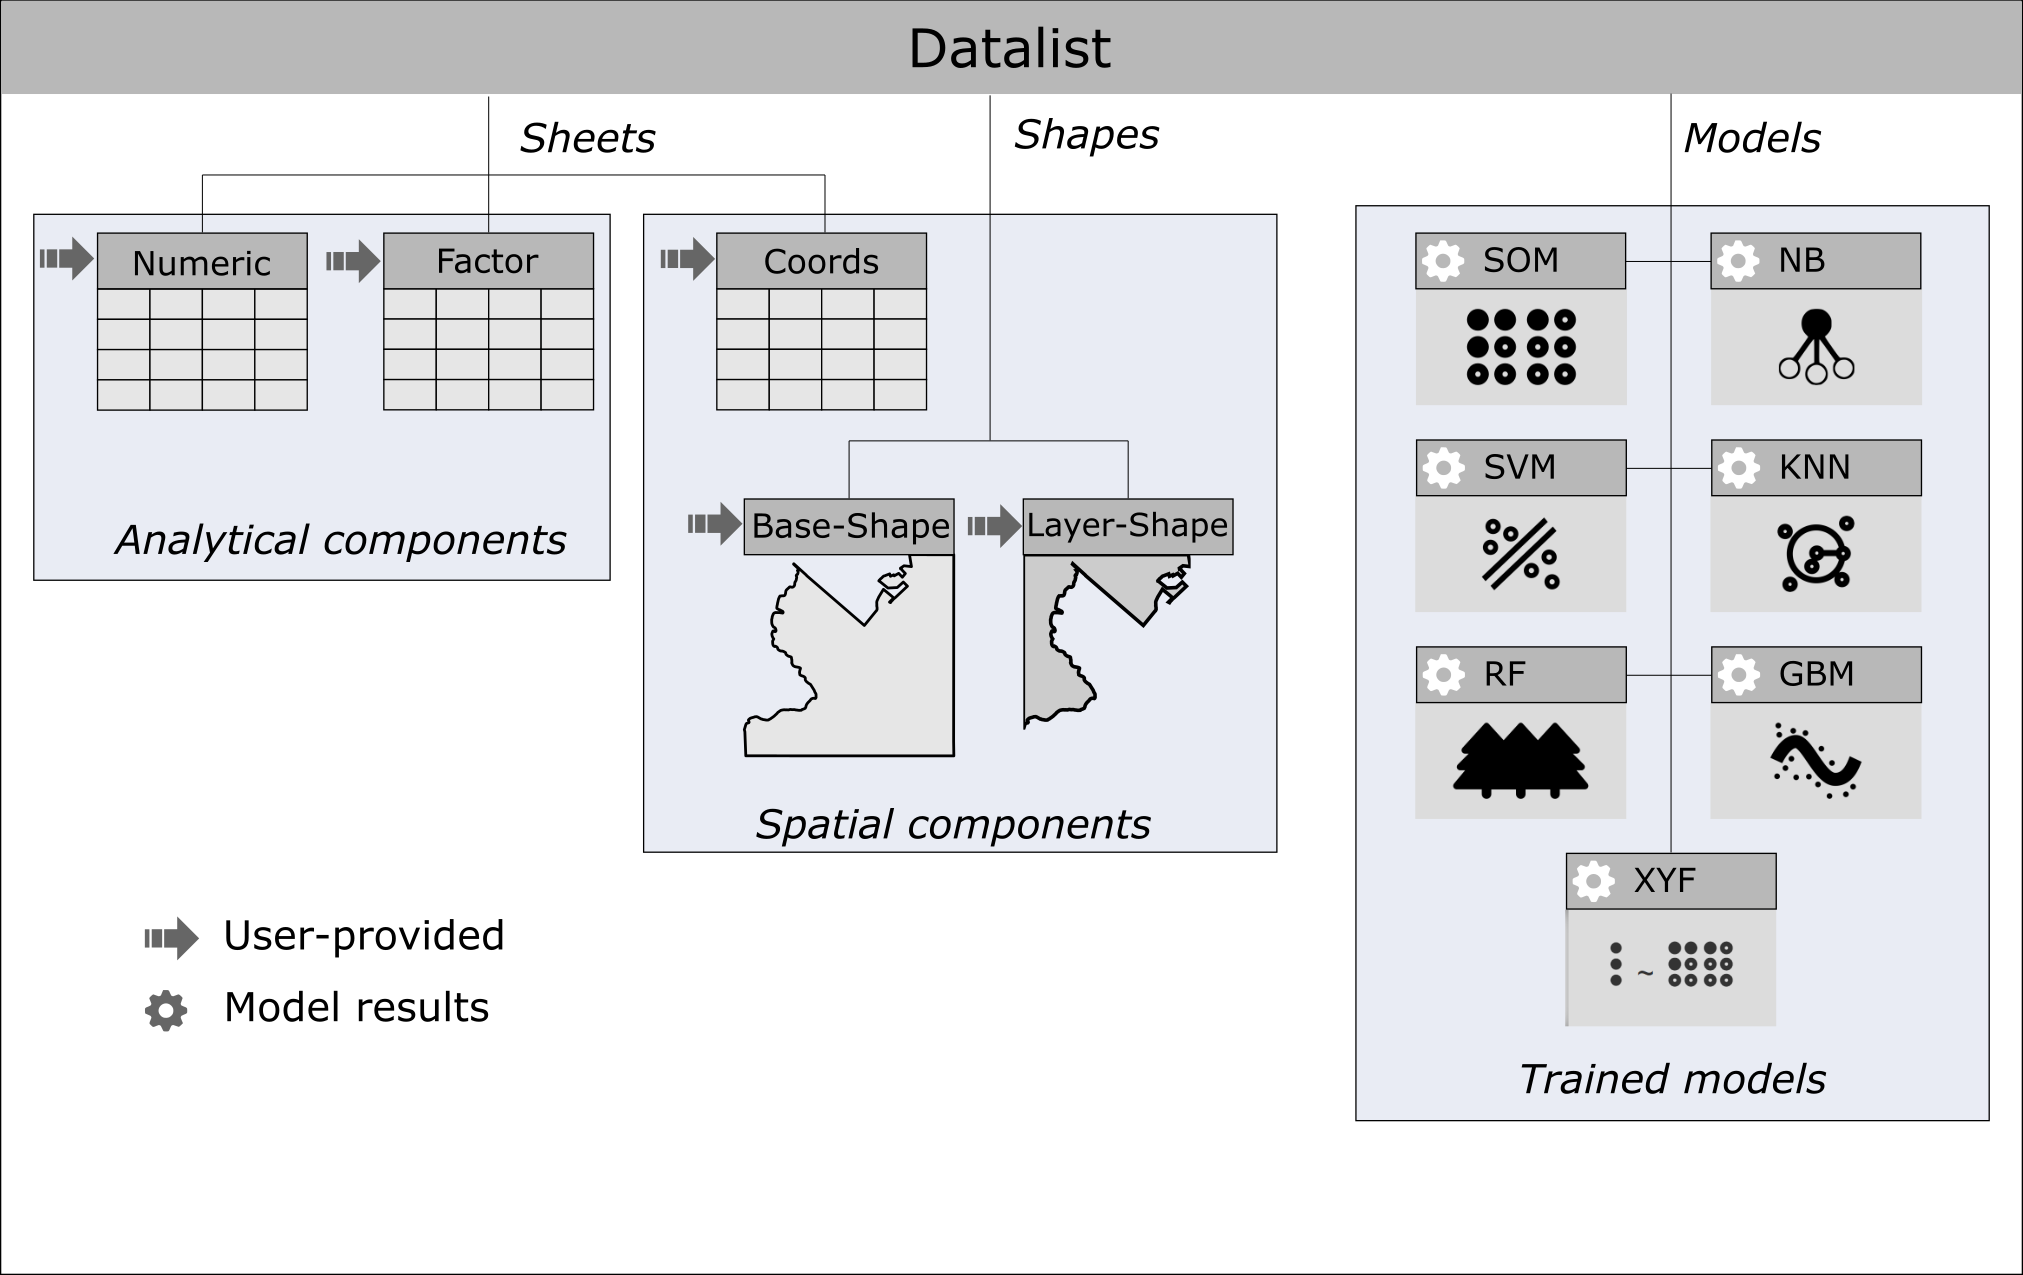 Fig. S5.1 - Schematic representation of a Datalist and its associated attributes